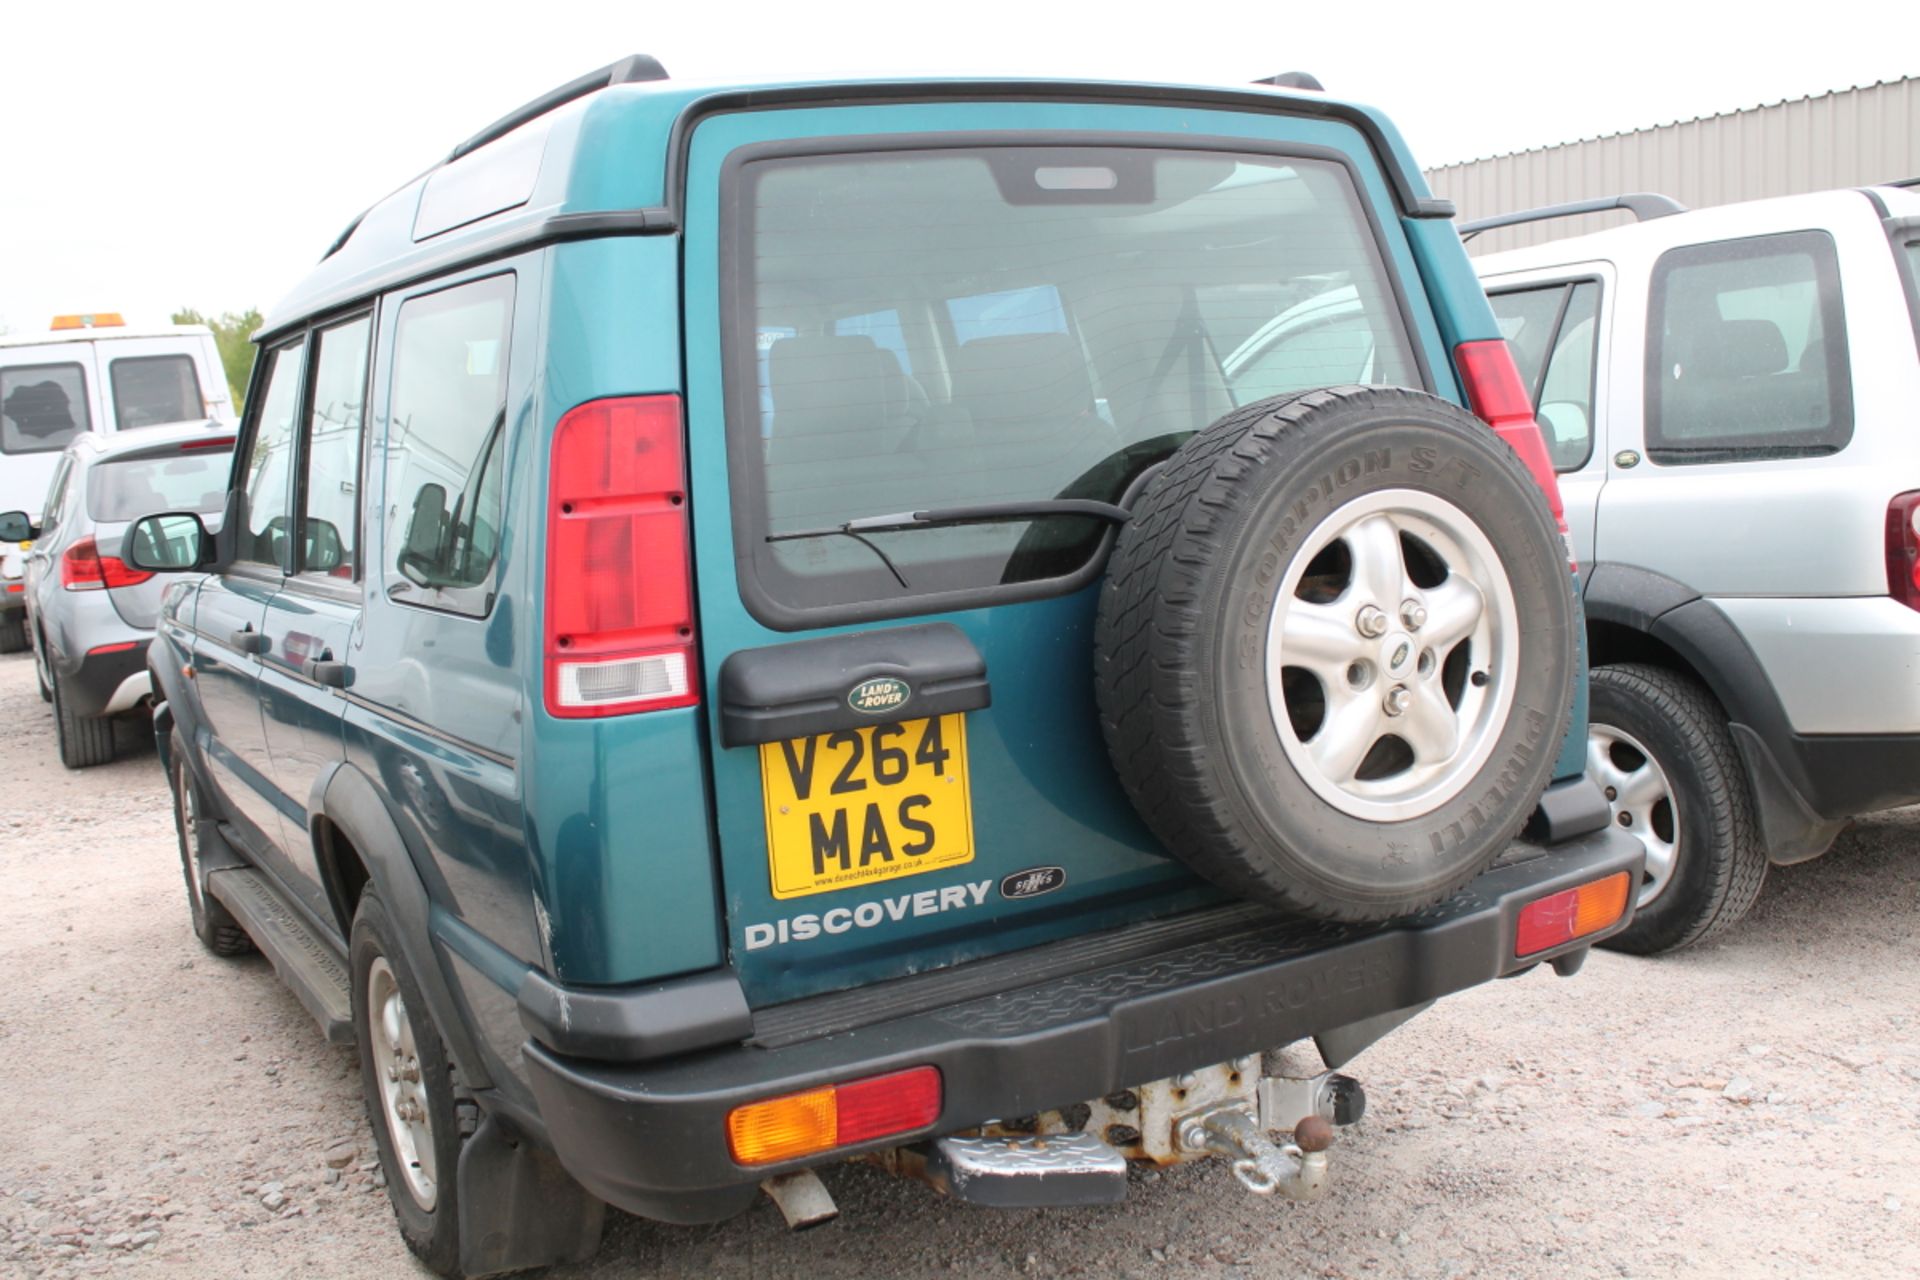 Land Rover Discovery Td5 Gs - 2495cc Estate - Image 2 of 3